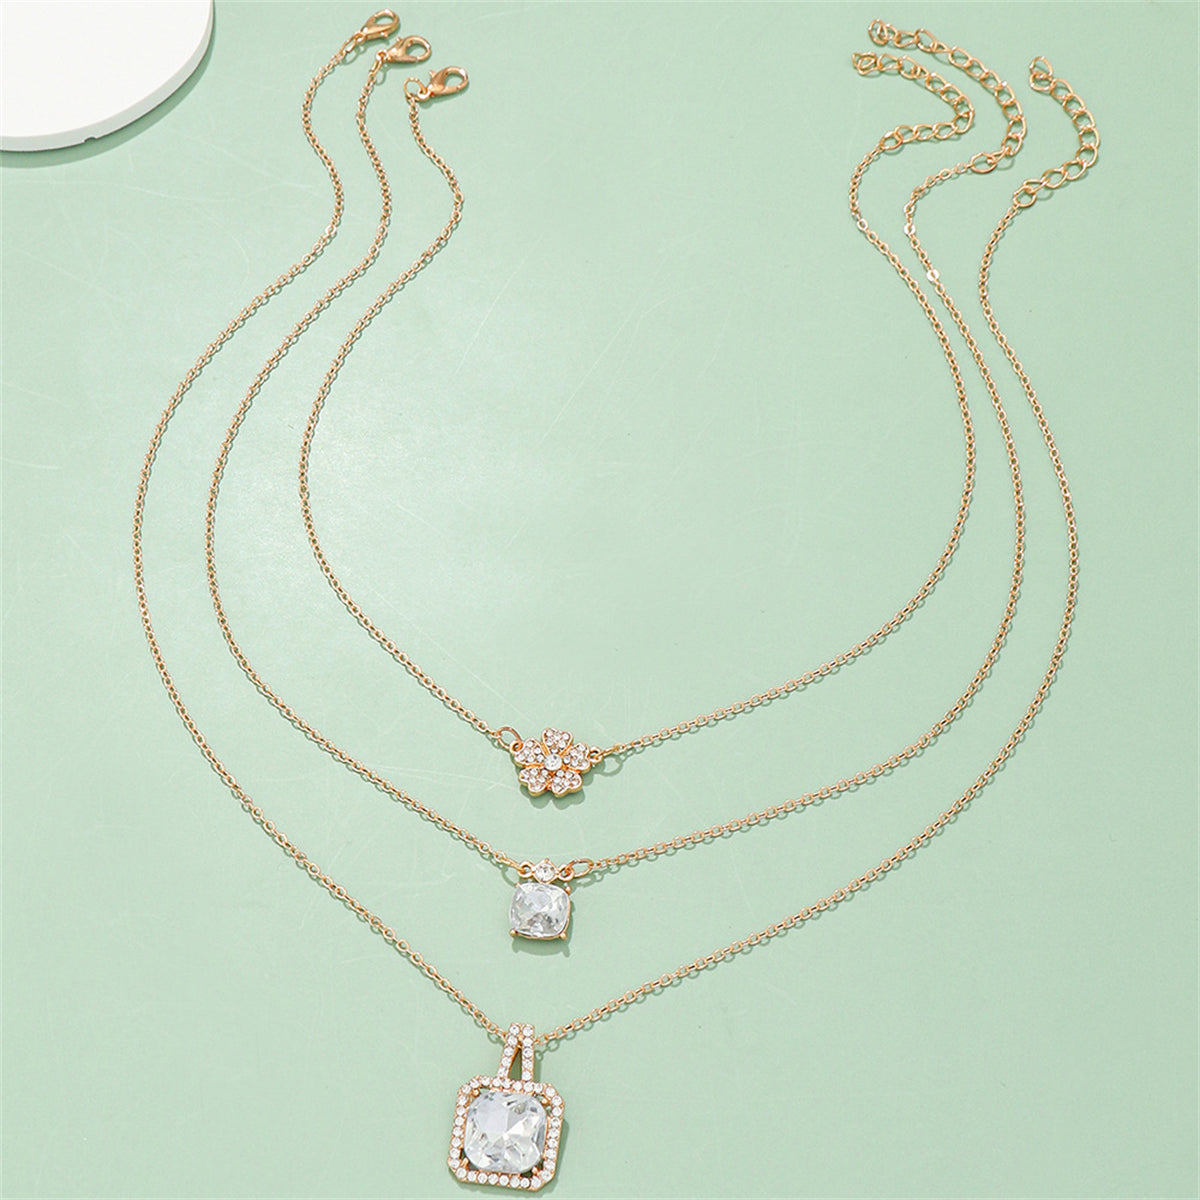 Crystal & Cubic Zirconia 18K Gold-Plated Flower Pendant Necklace Set